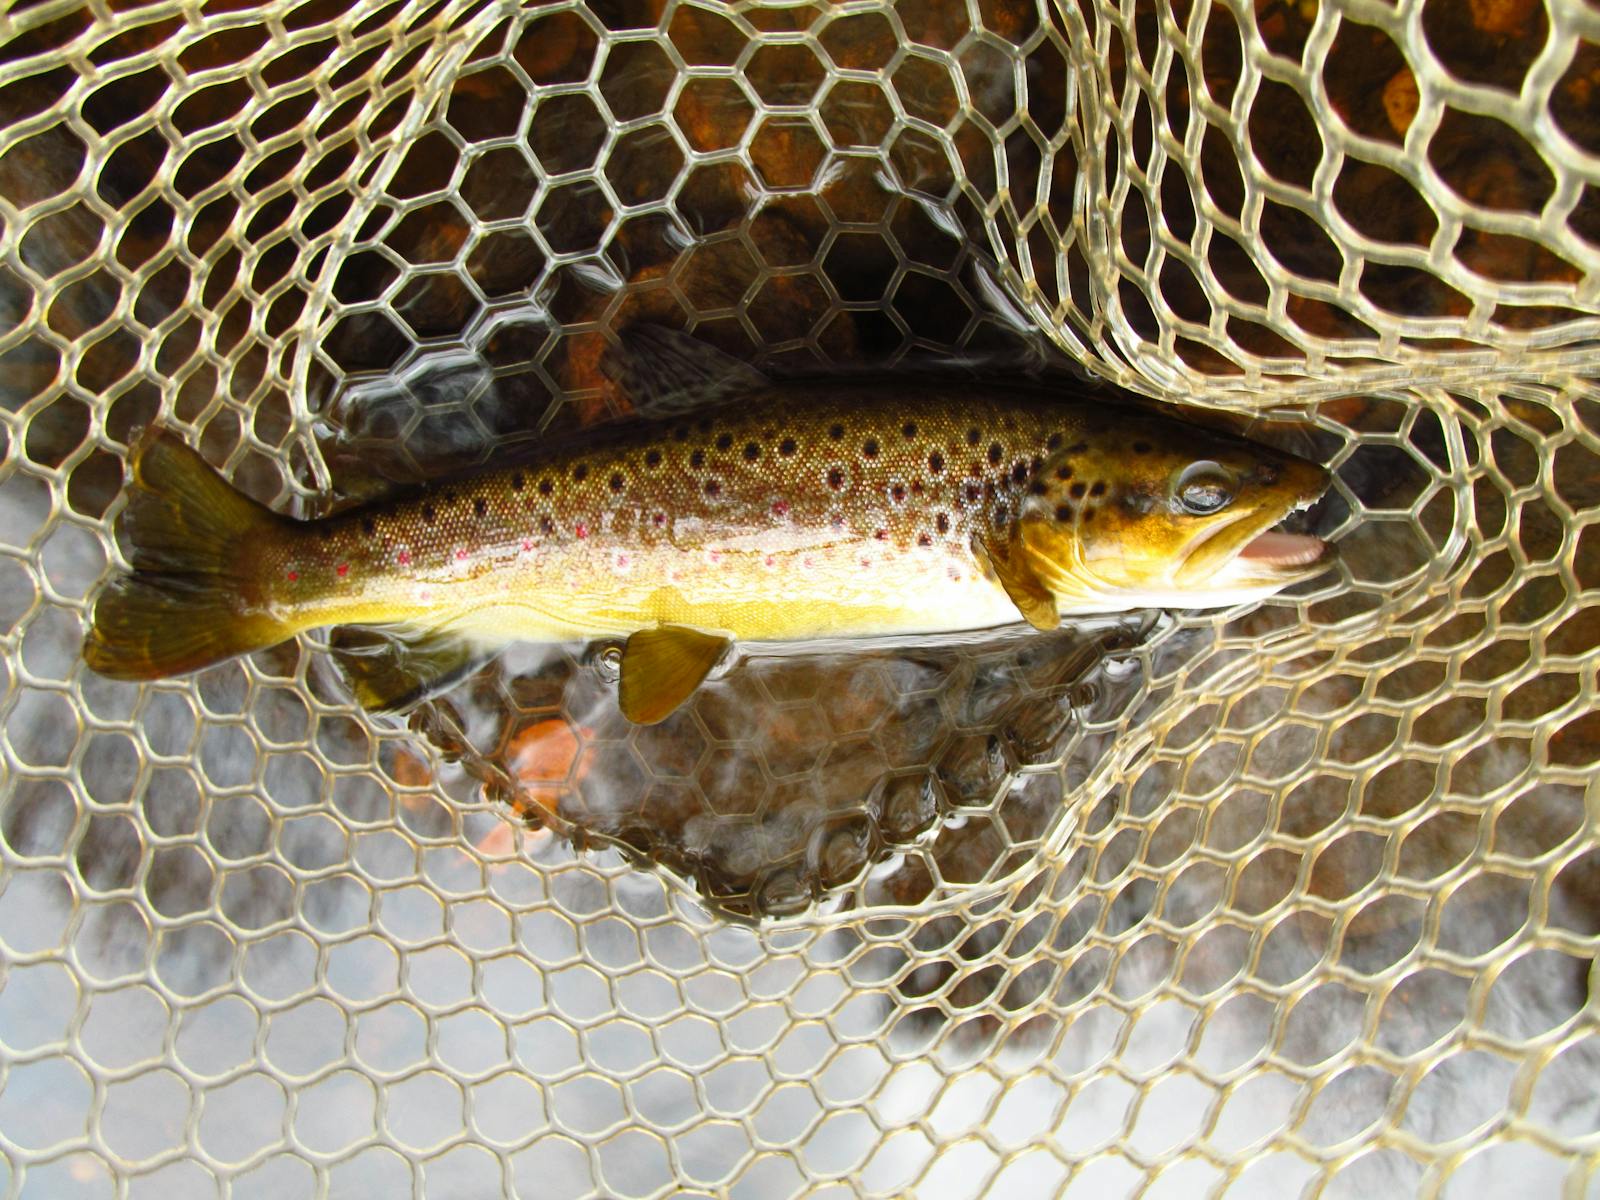 Brown Trout in a fishing net